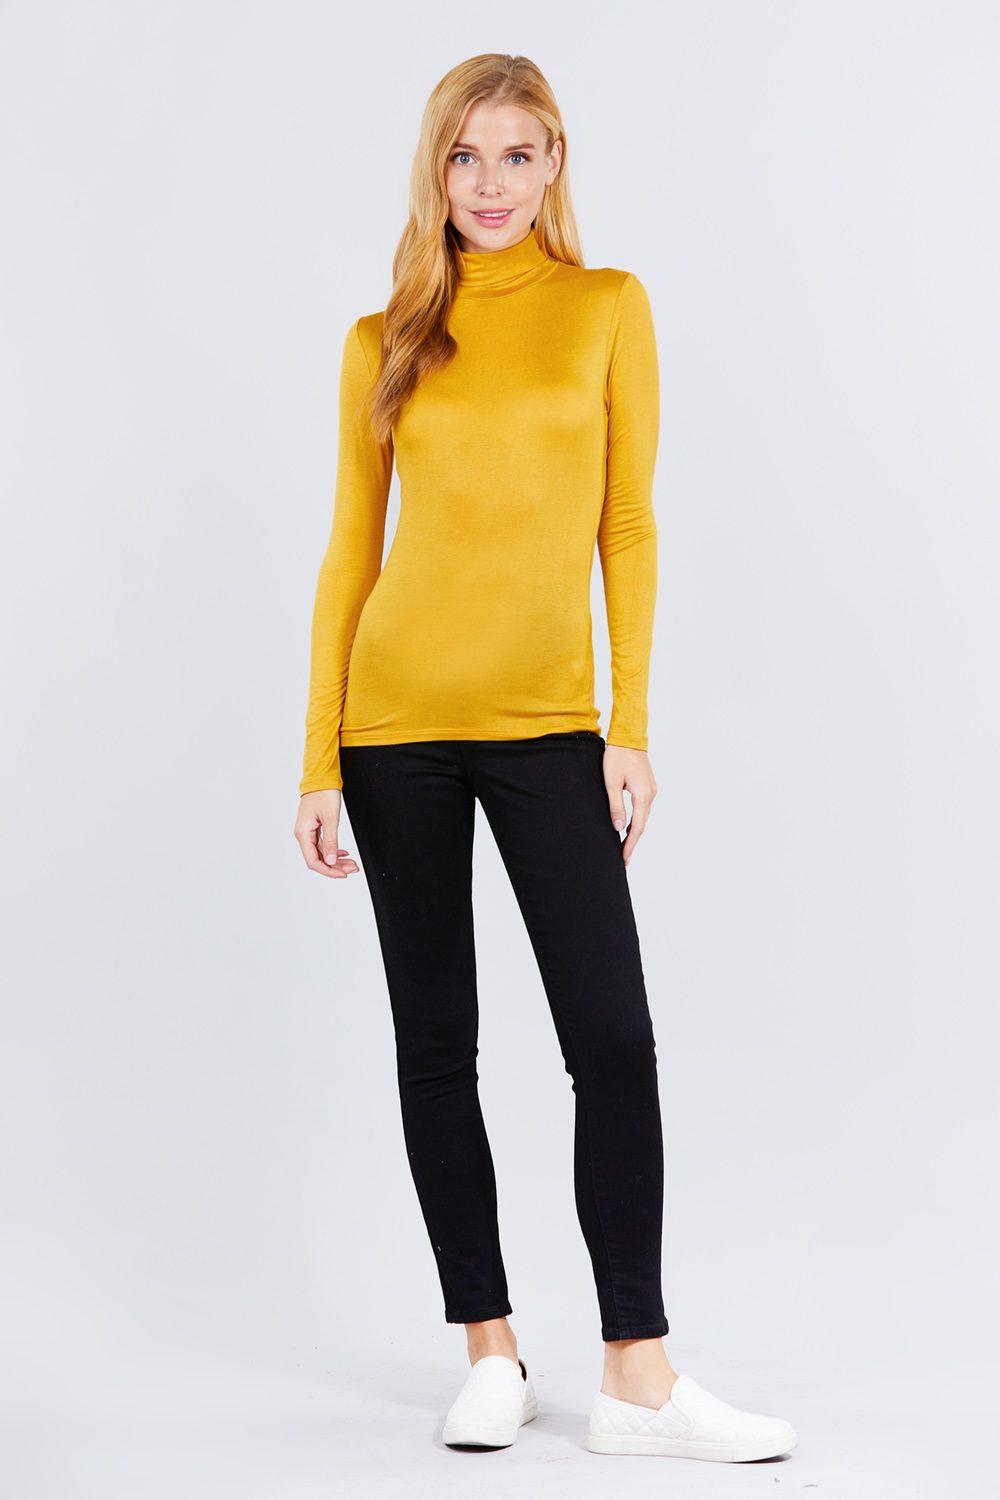 Turtle Neck Rayon Jersey Top Naughty Smile Fashion